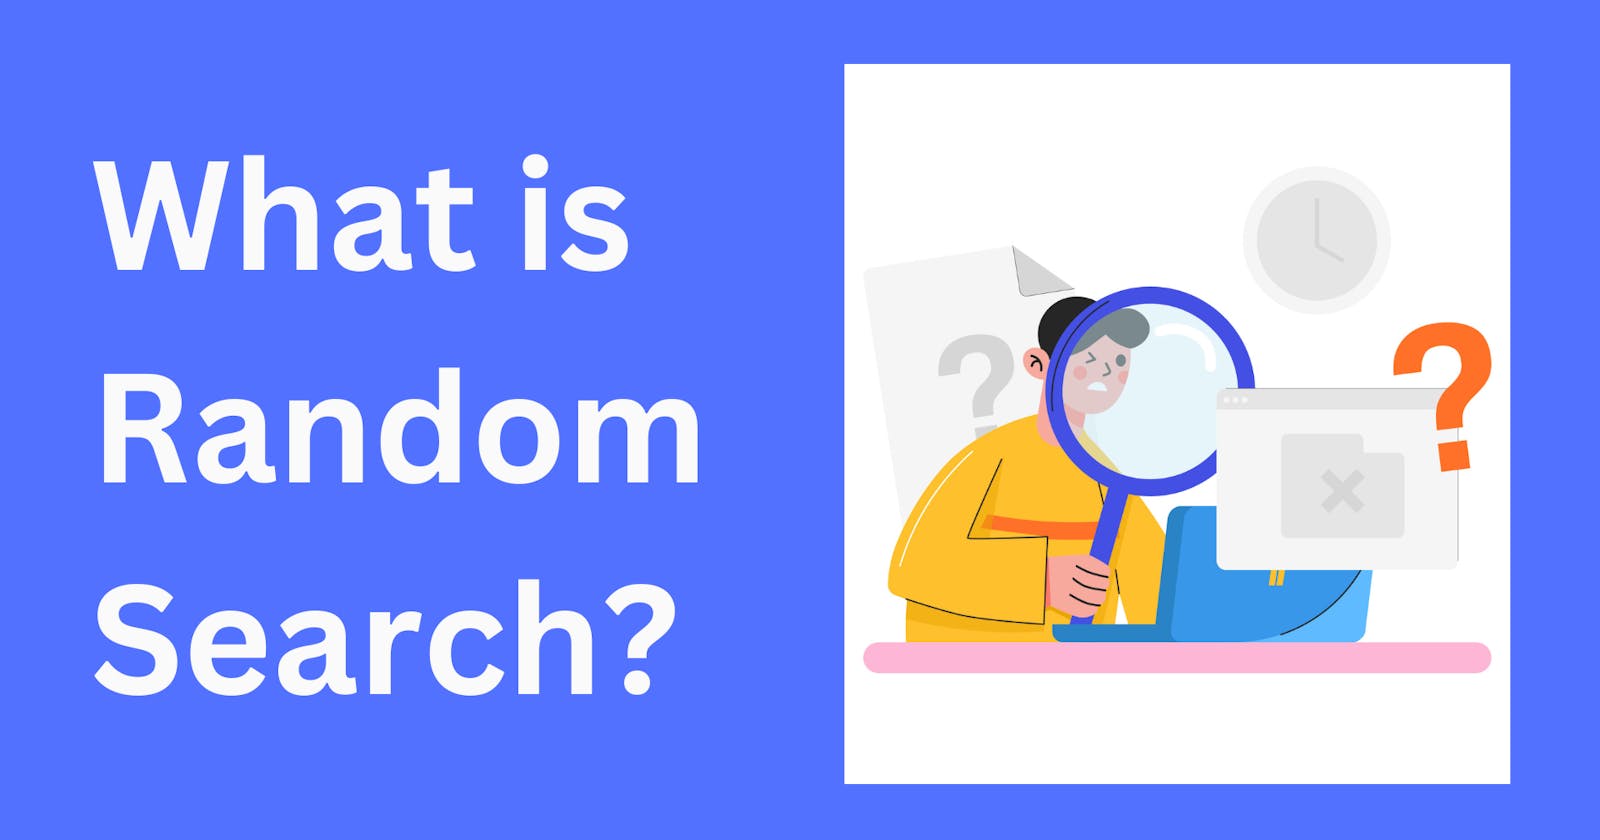 What is Random Search in Machine Learning?